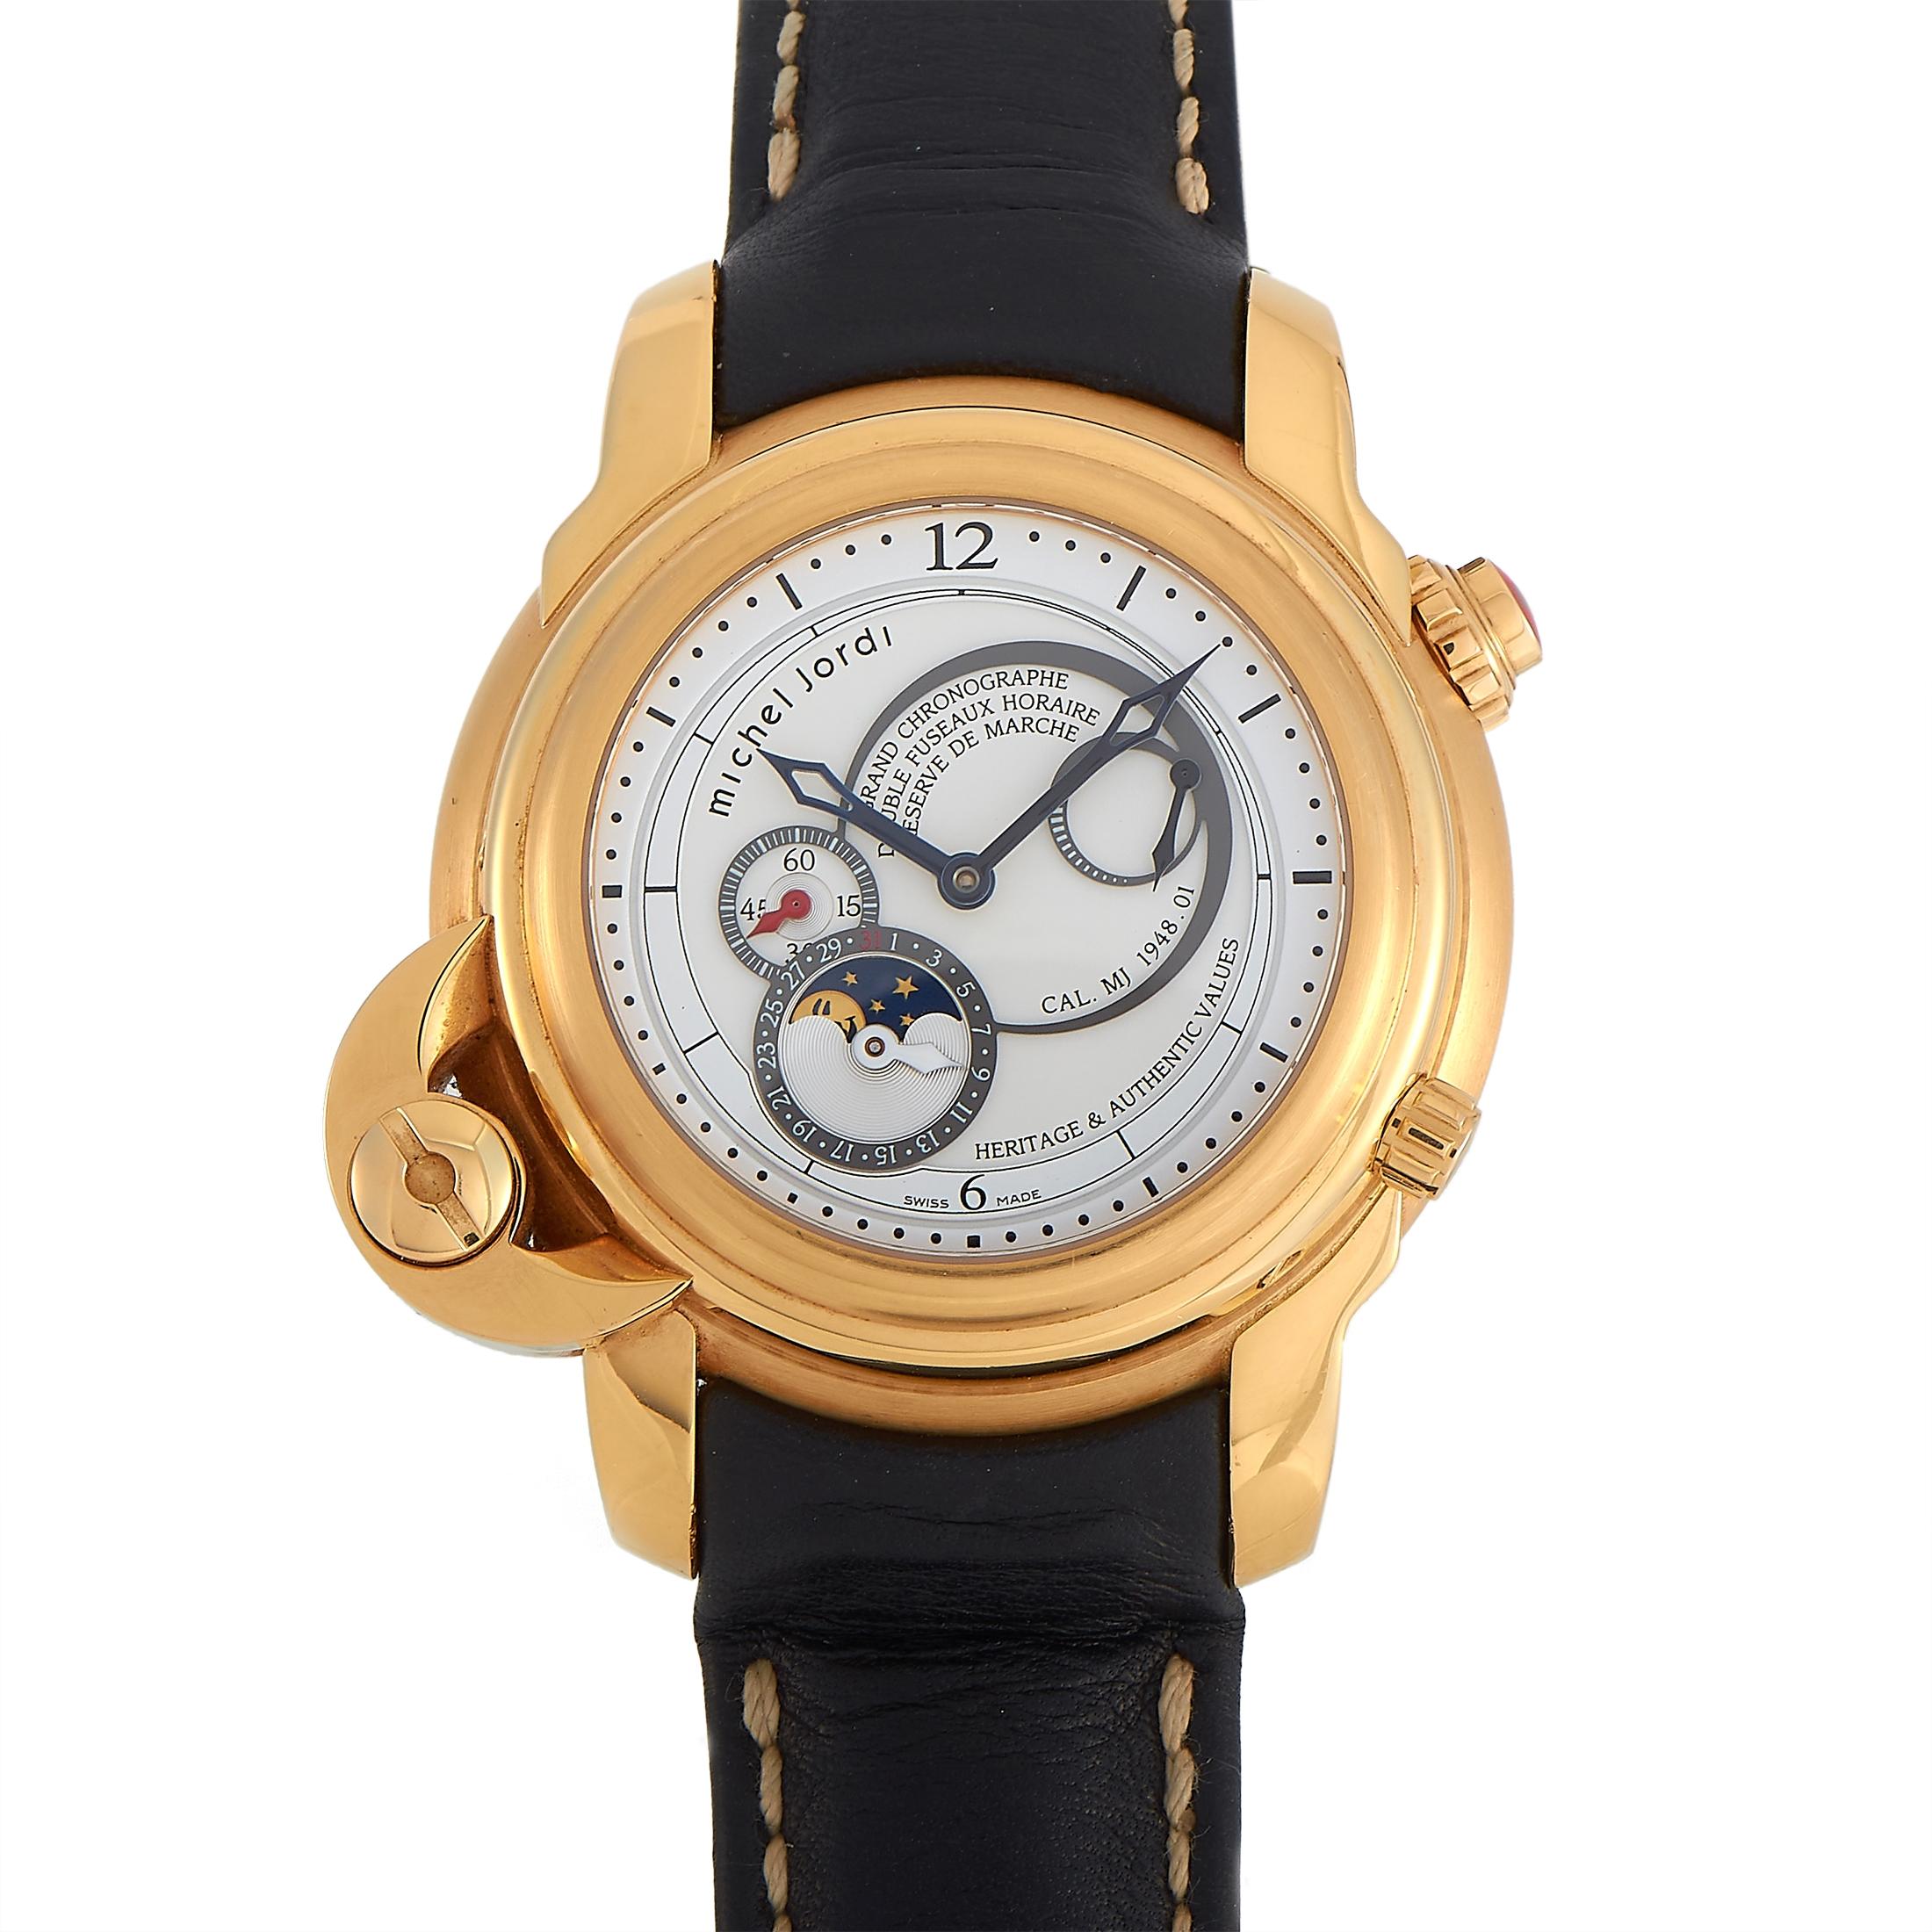 The Michel Jordi Heritage Twins Watch, is a captivating timepiece with a unique sense of style. 

A special twist-lock closure makes this timepiece essentially two watches in one. This exquisite timepiece begins with a 45mm case crafted from 18K